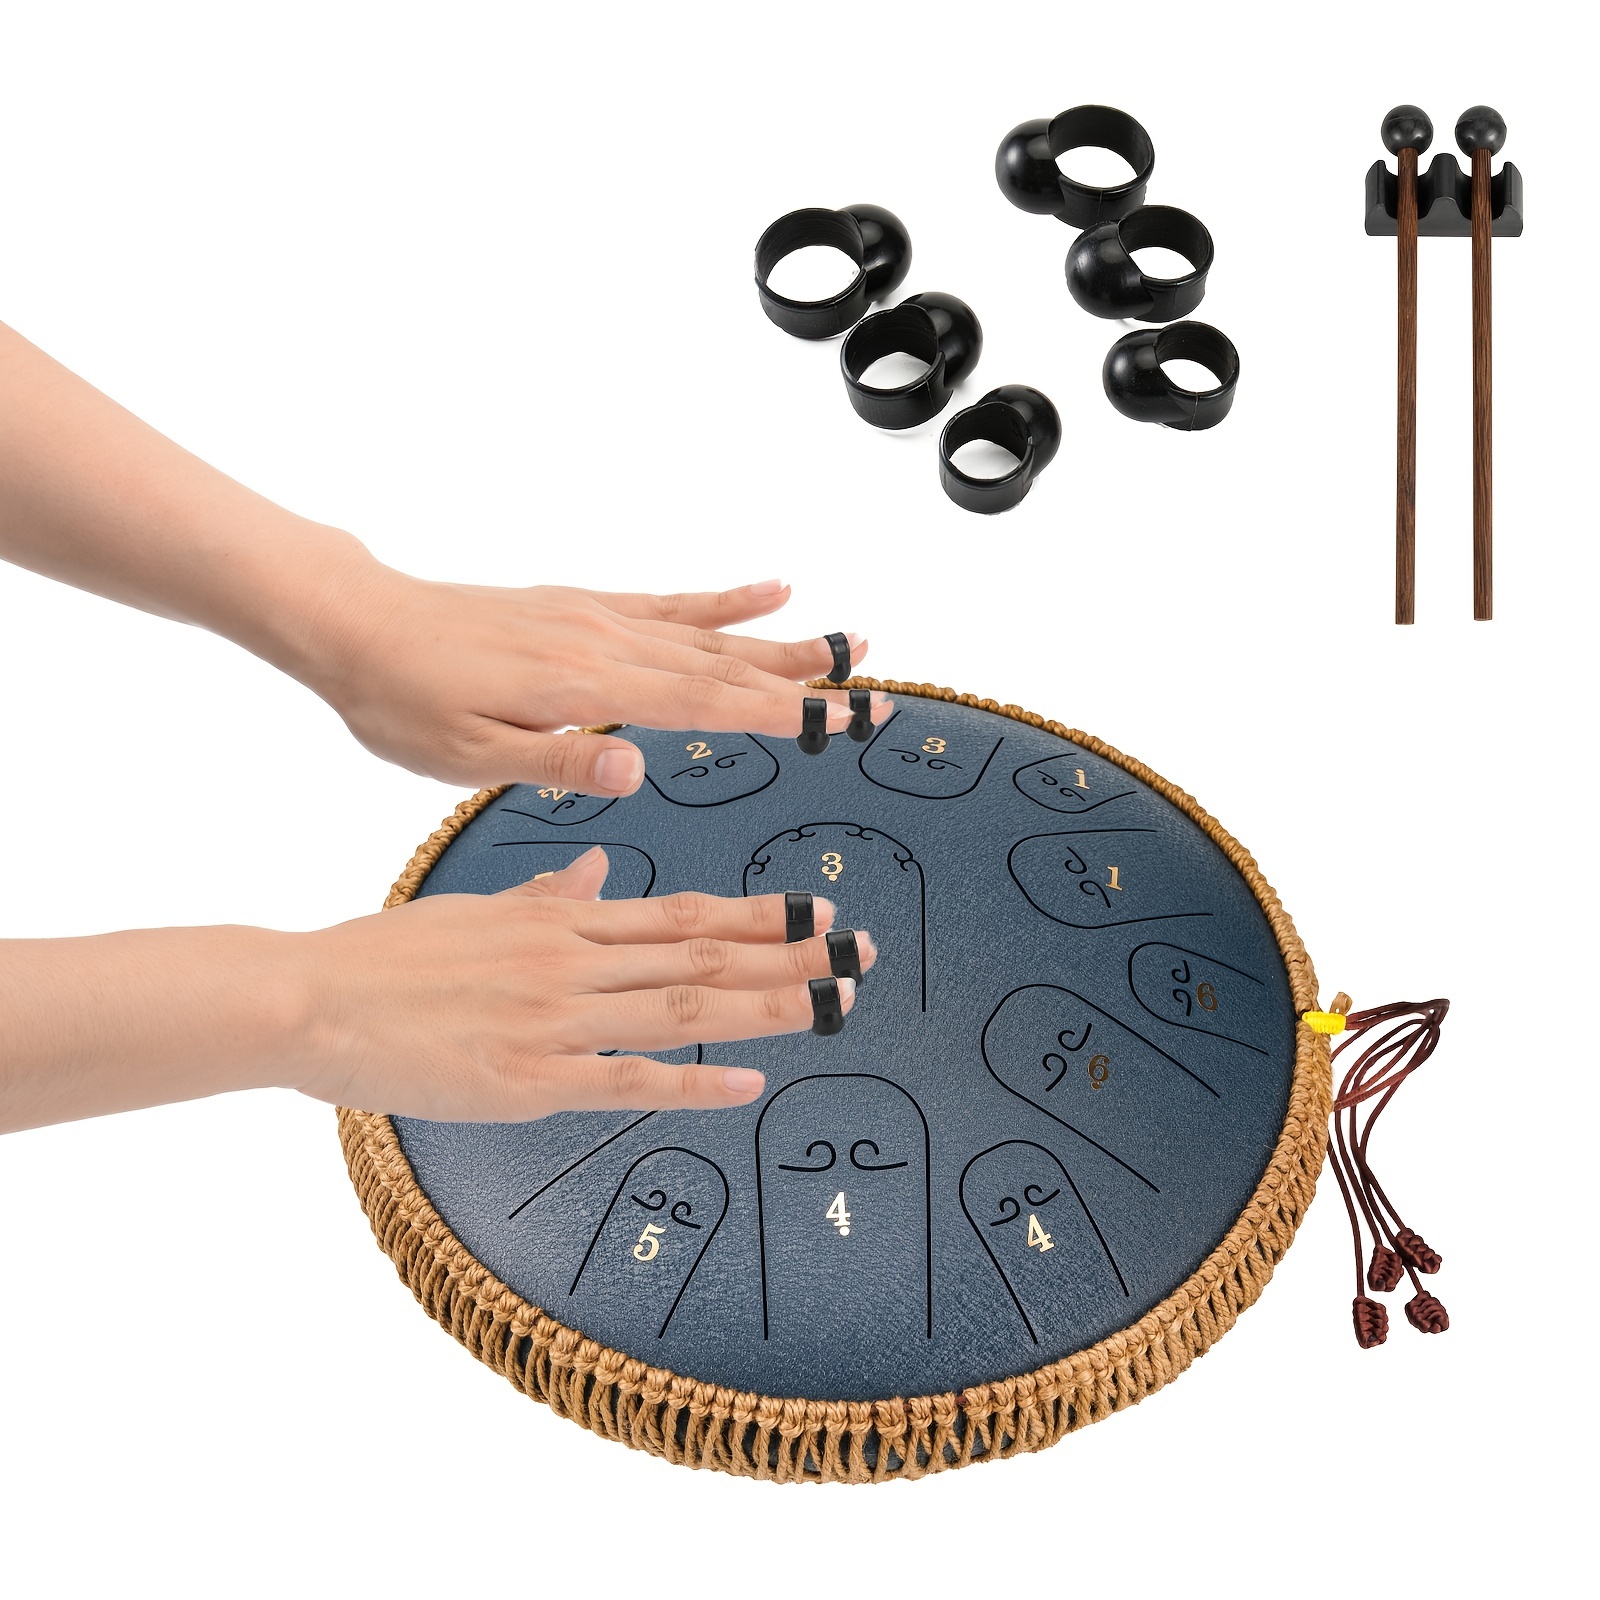 Steel Tongue Drum - HOPWELL 15 Note 14 Inch Tongue Drum - Hand Pan Drums  with Music Book, Steel Handpan Drum Mallets and Carry Bag, D Major (Black)